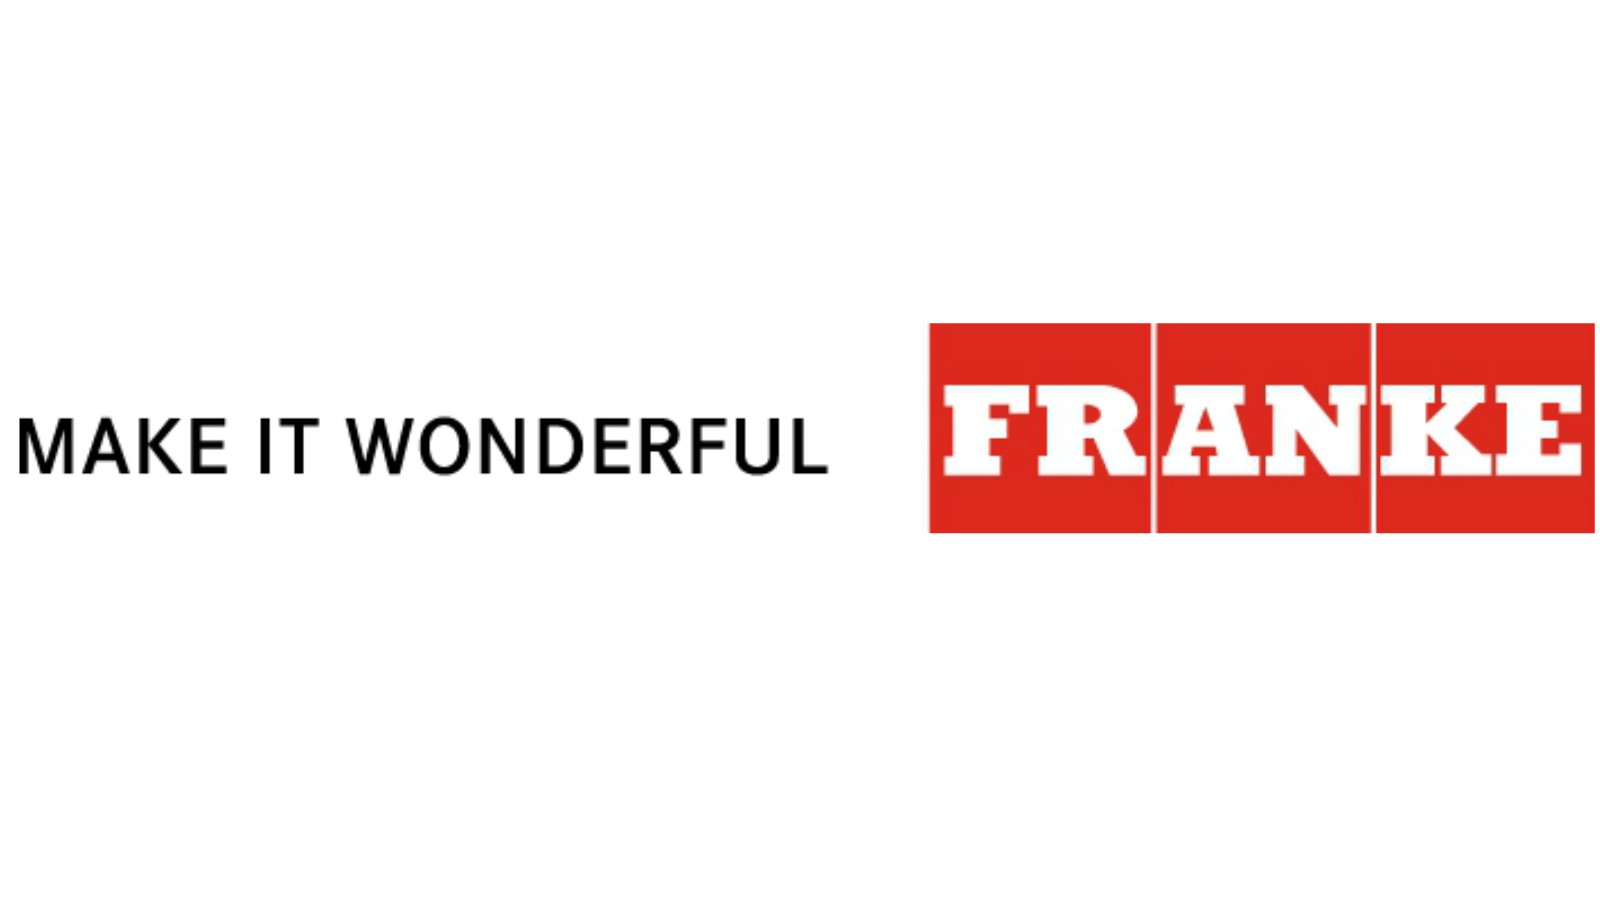 Sinks & Things acquired by Franke UK - Kitchens and Bathrooms News